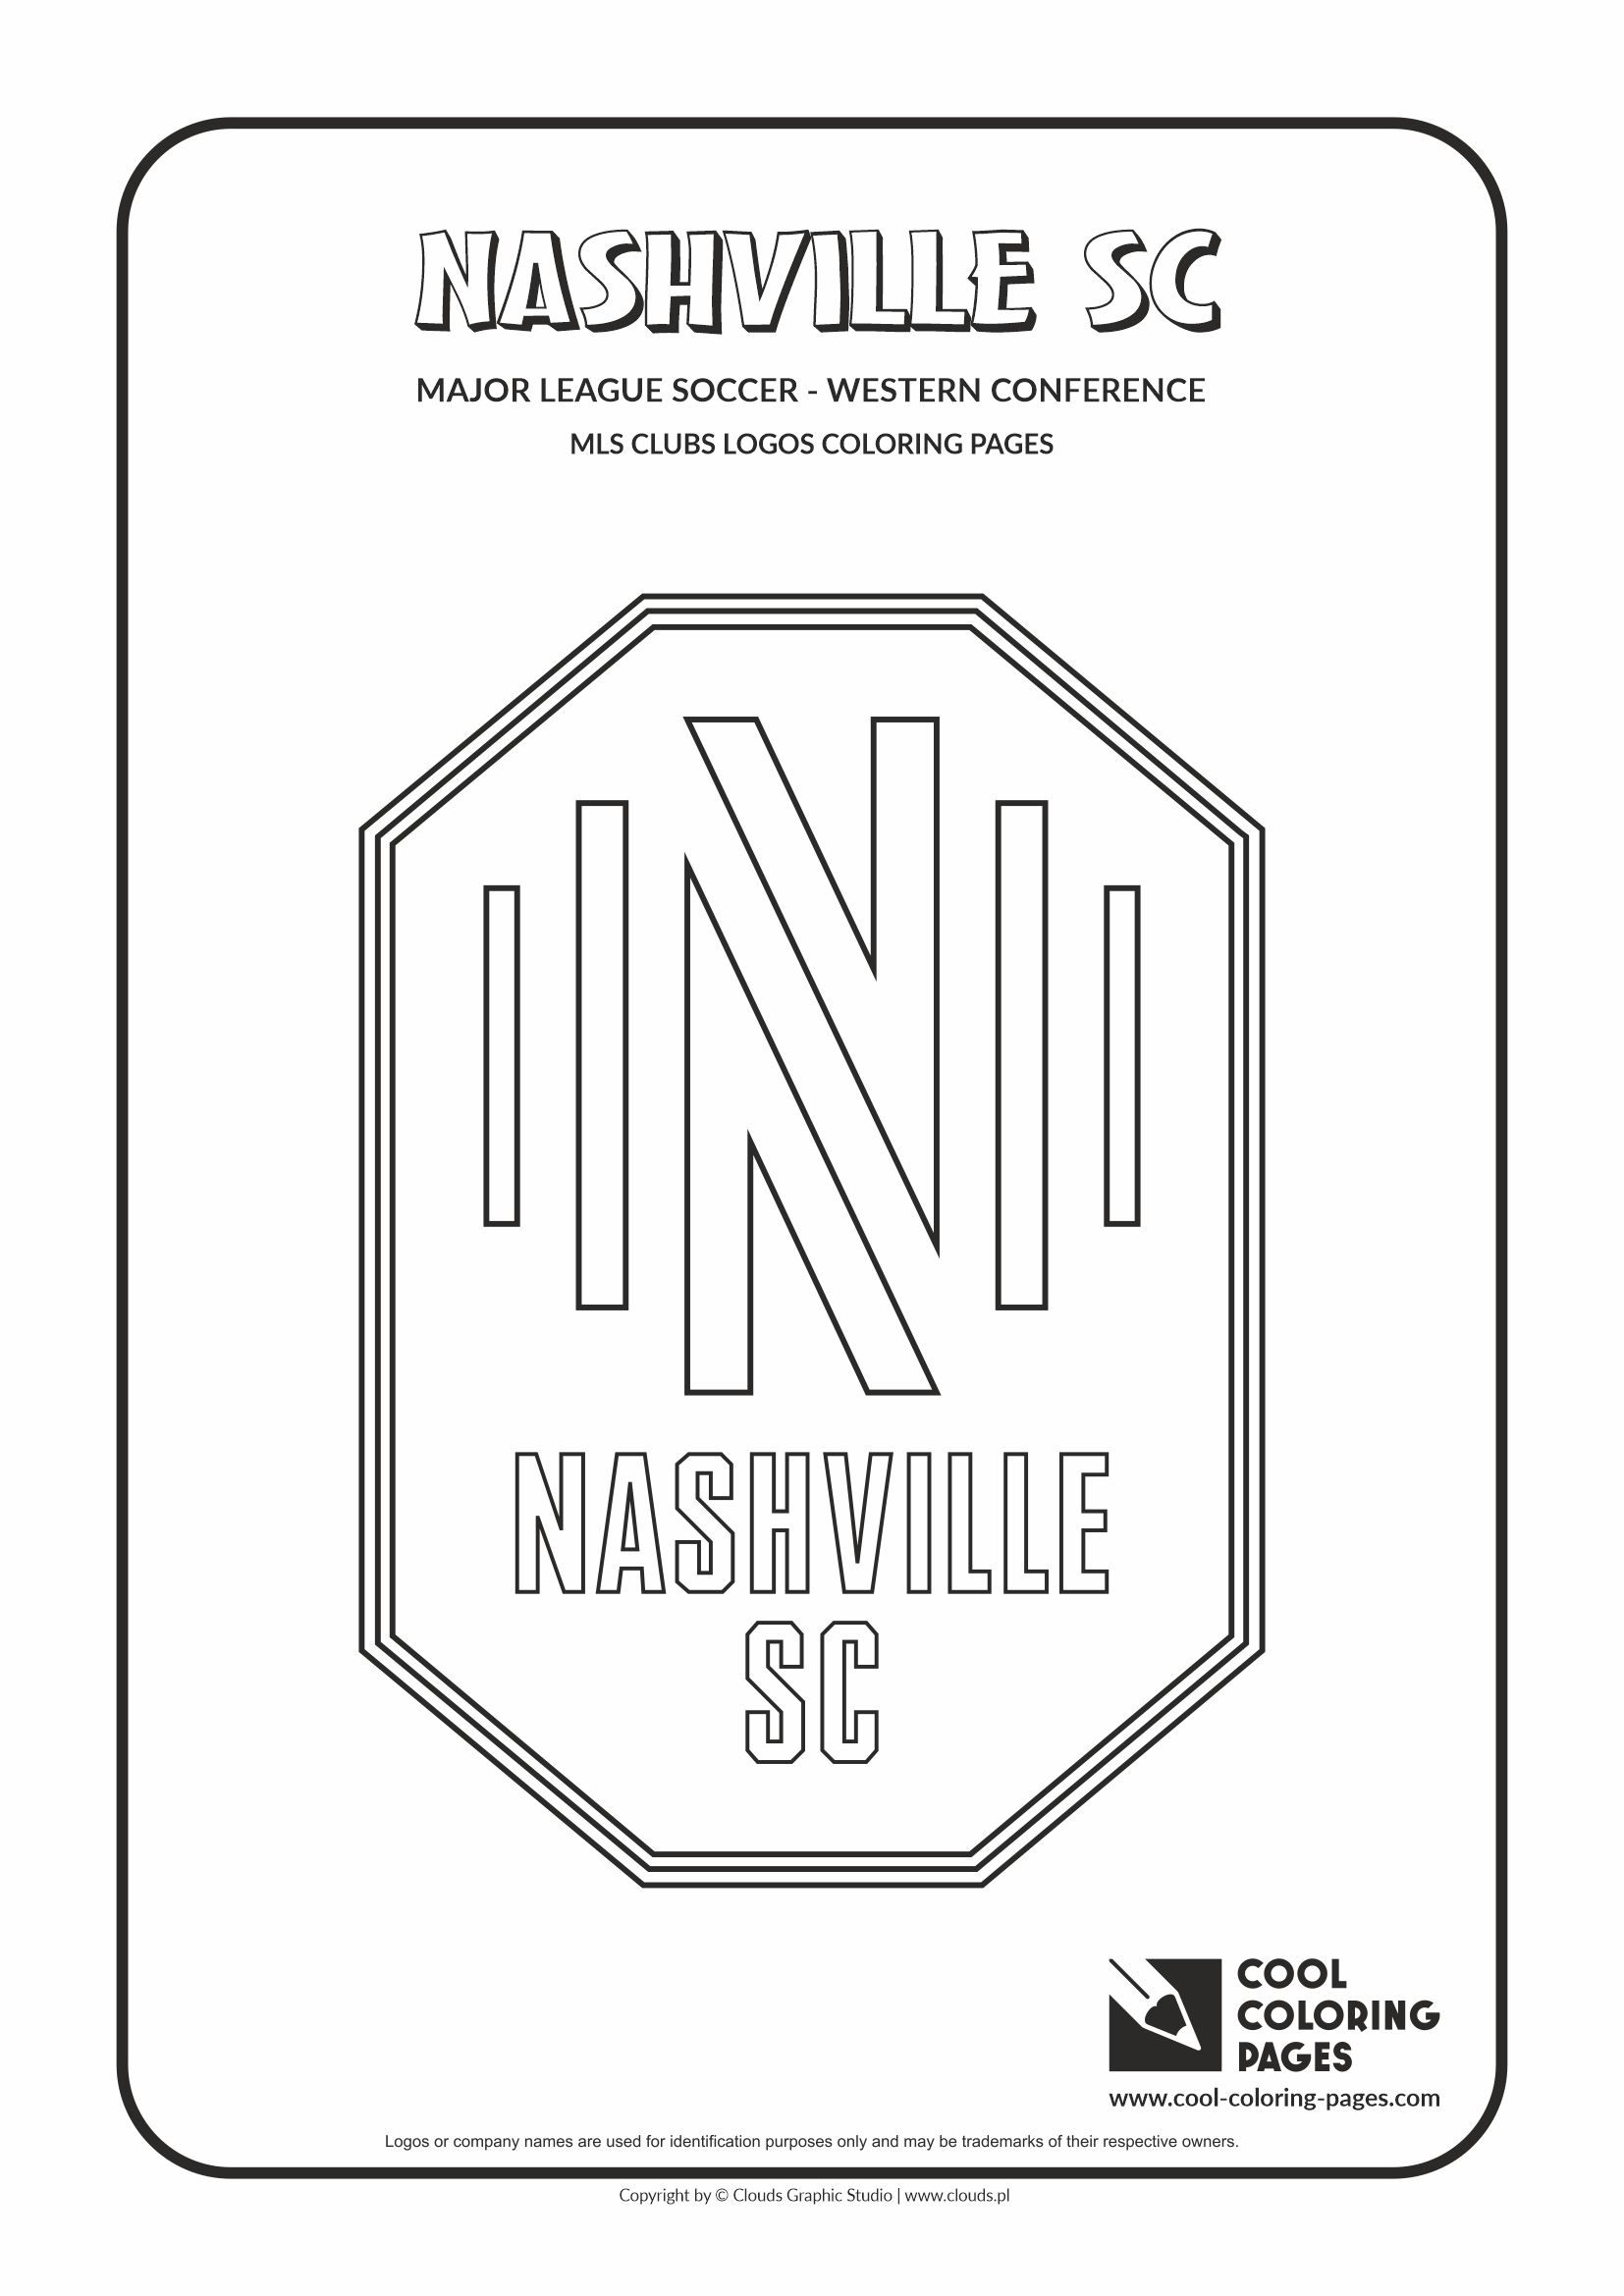 Cool Coloring Pages – MLS clubs logos - Nashville SC